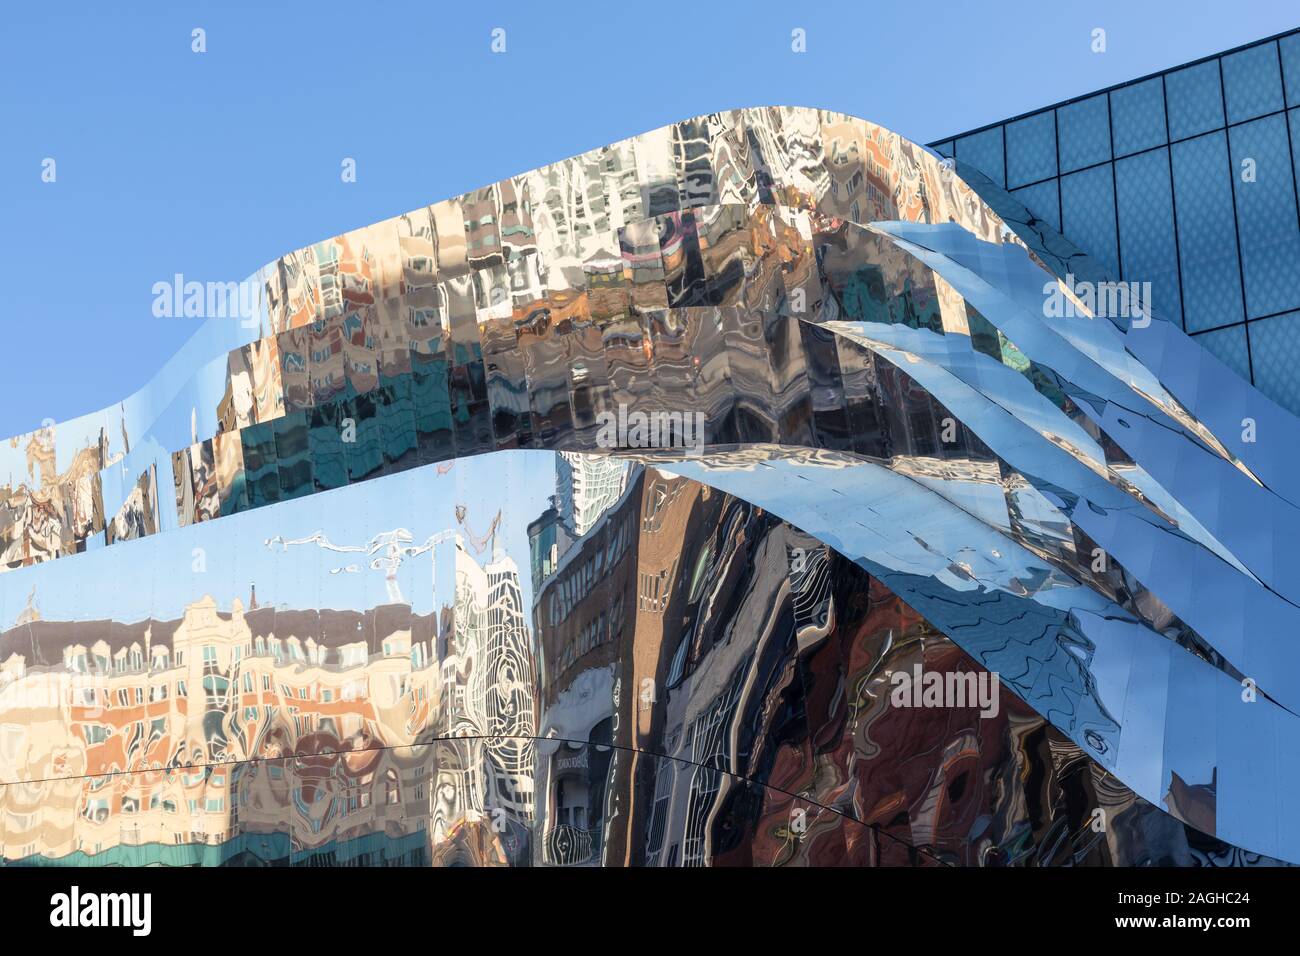 Birmingham, West Midlands, UK: Nearby buildings are reflected in the stainless steel cladding on the outside of Grand Central shopping centre. Stock Photo